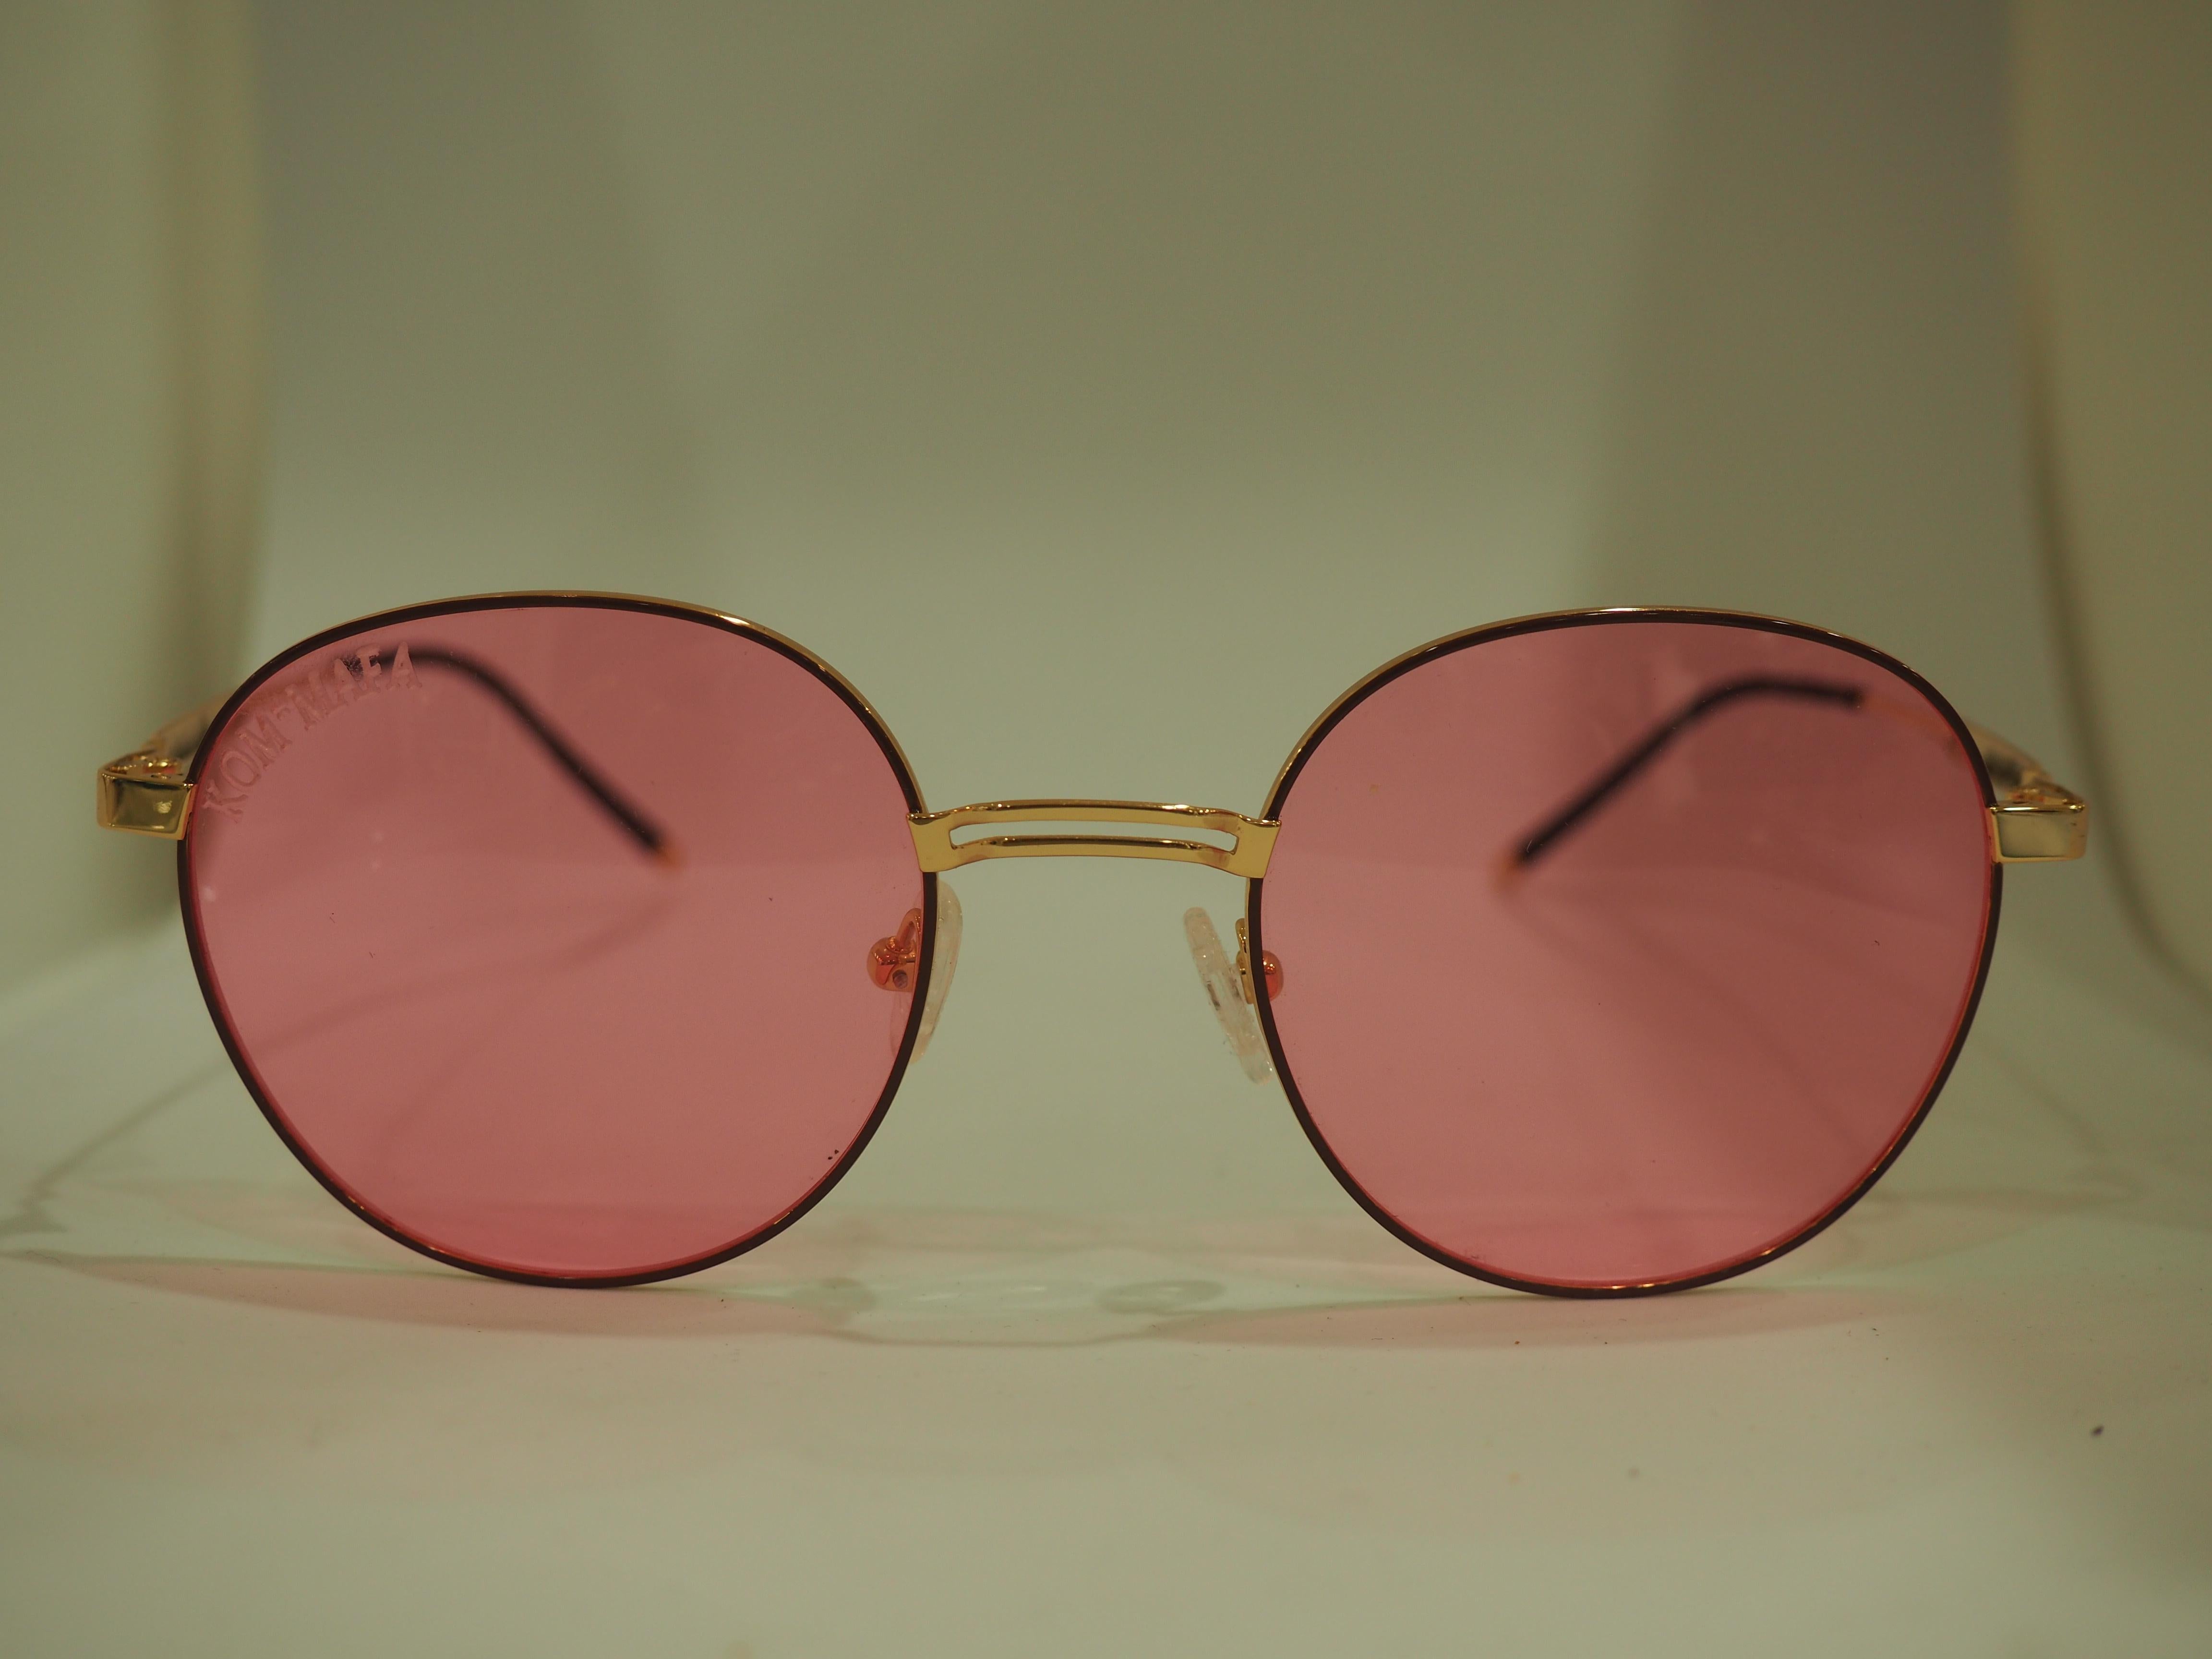 Kommafa pink sunglasses
totally made in italy 
one of a kind